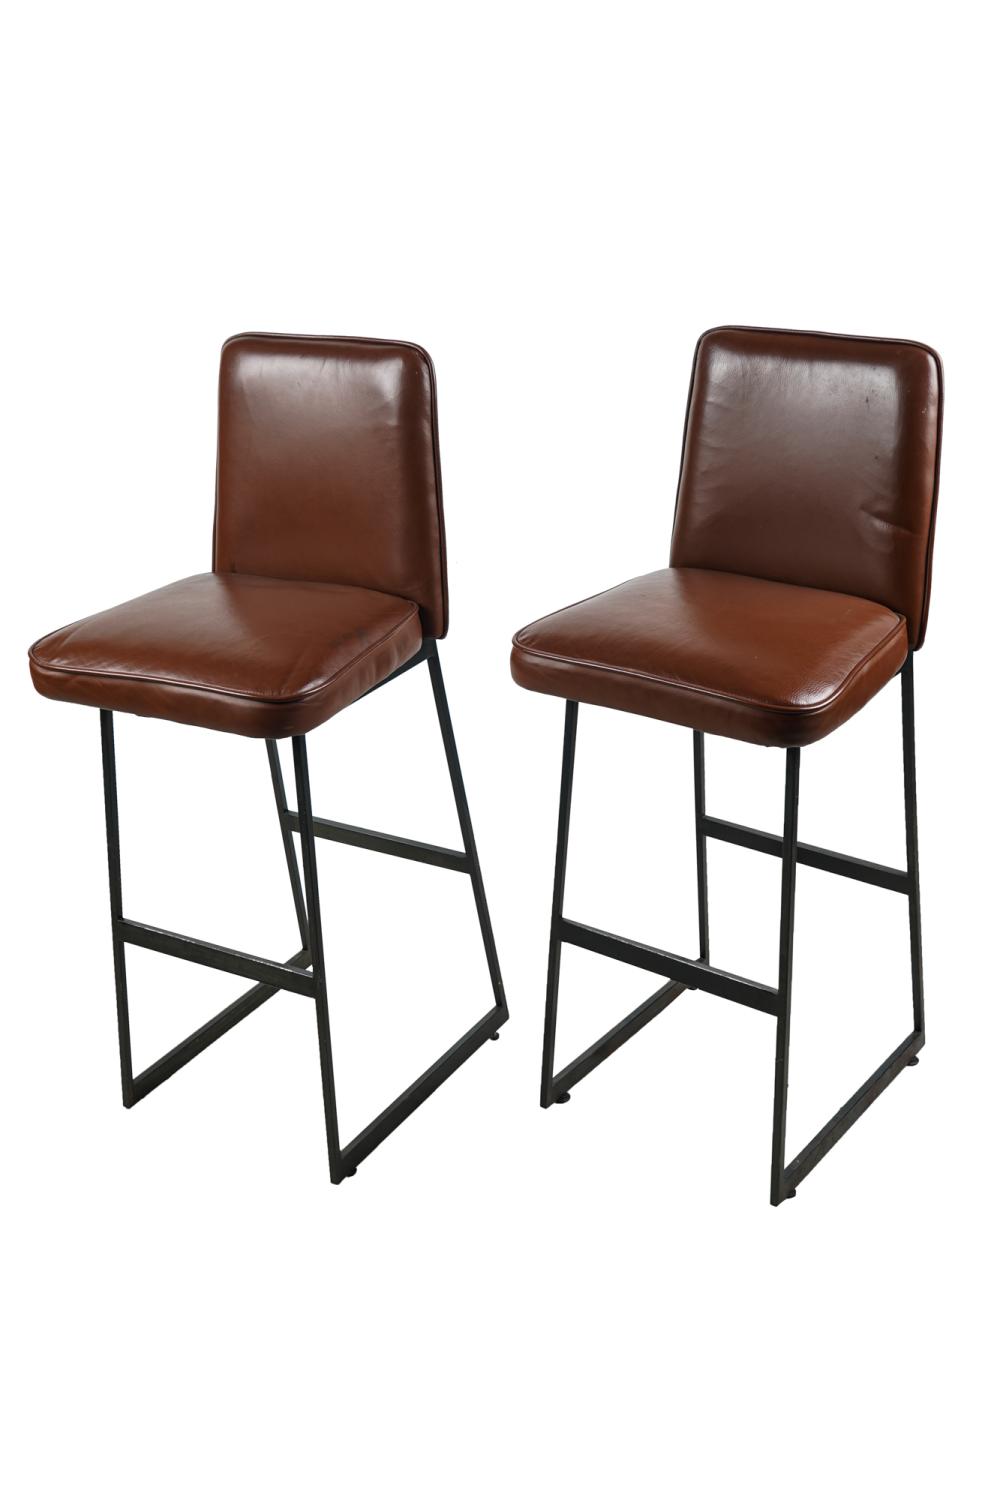 PAIR OF METAL & LEATHER CONTEMPORARY